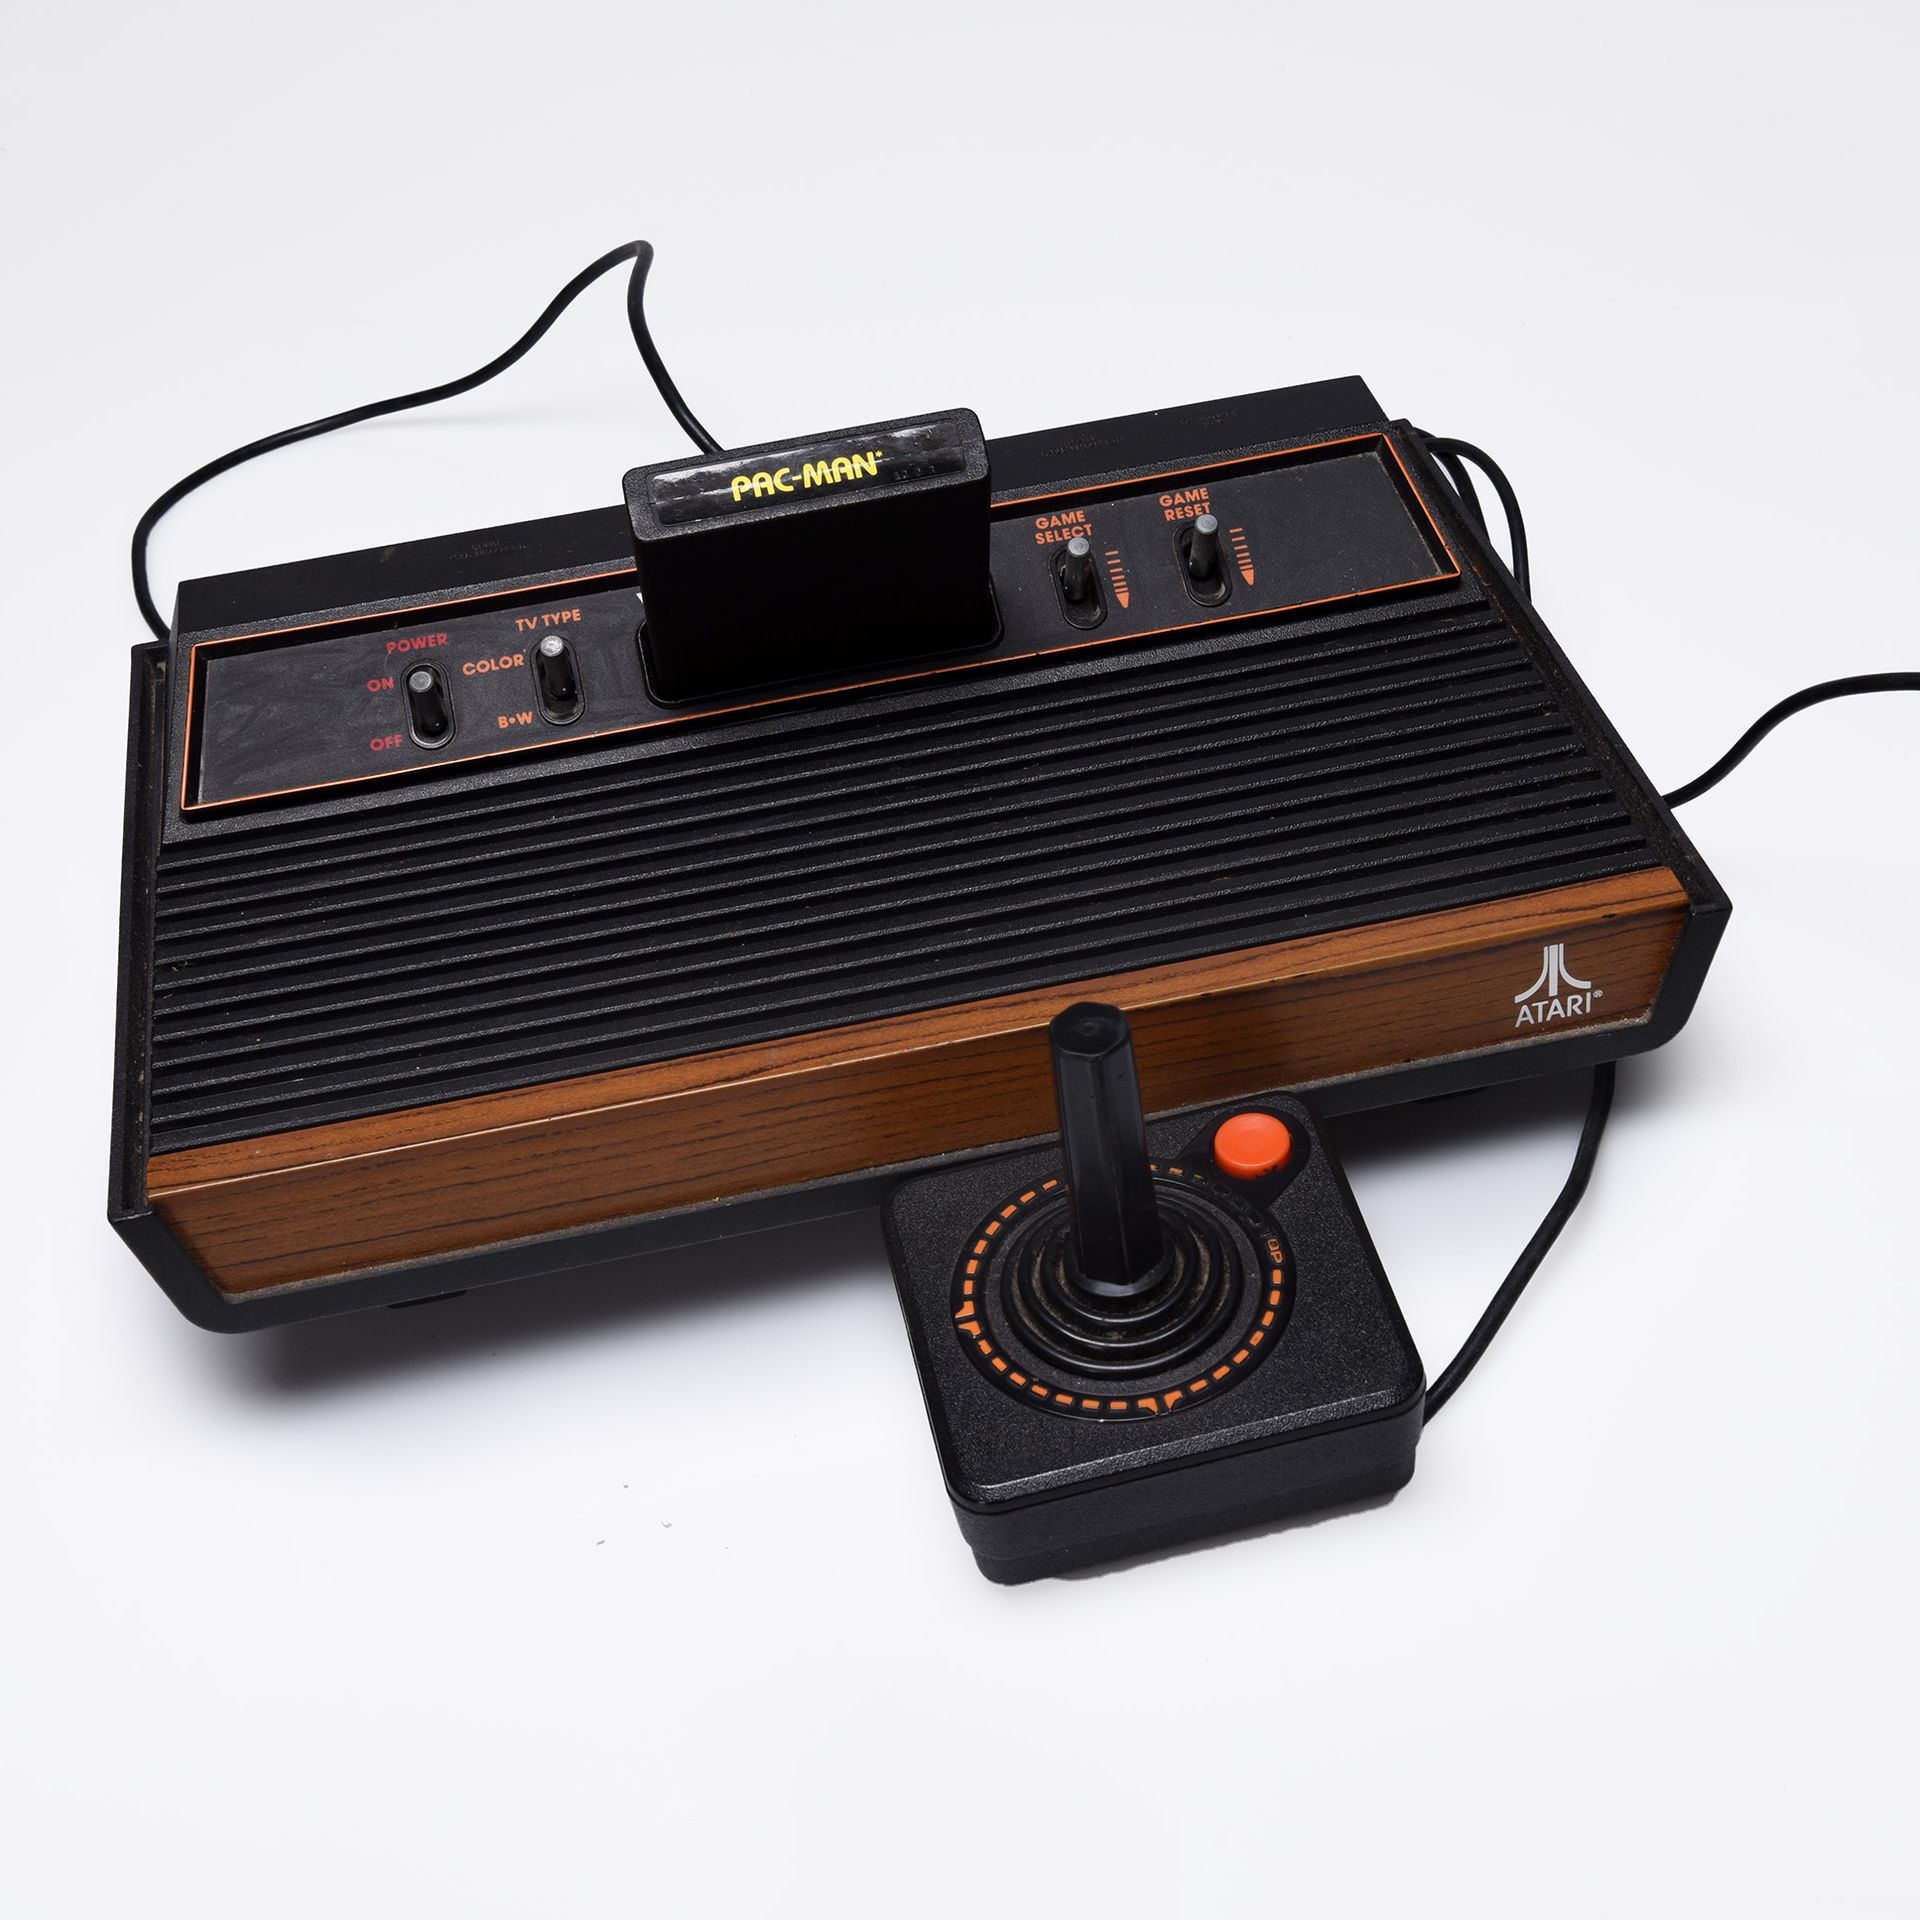 Photo of a black and brown video game console with a controller attached